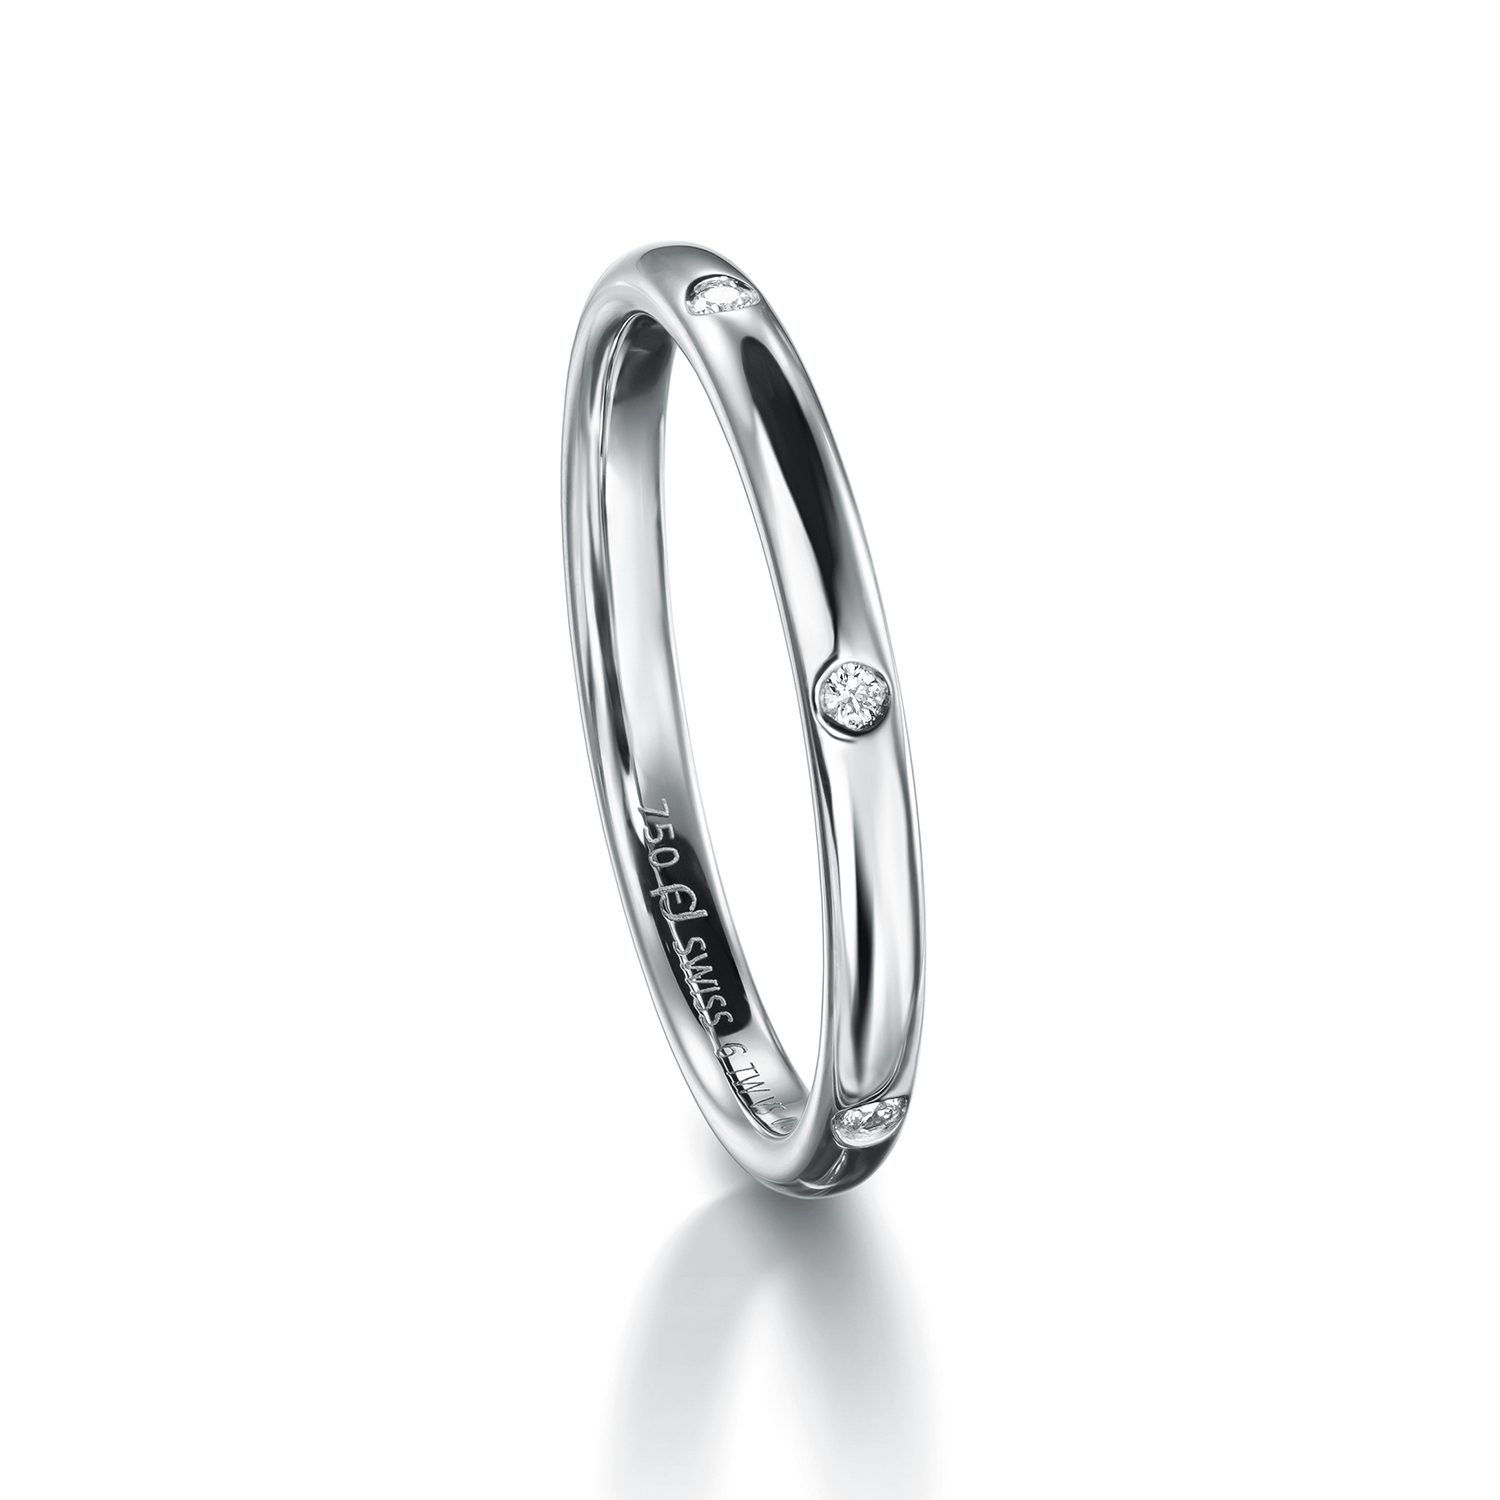 wedding bands, wedding rings, in gold, platinum, palladium, bicolor, with diamonds, Ringdividuell, individual